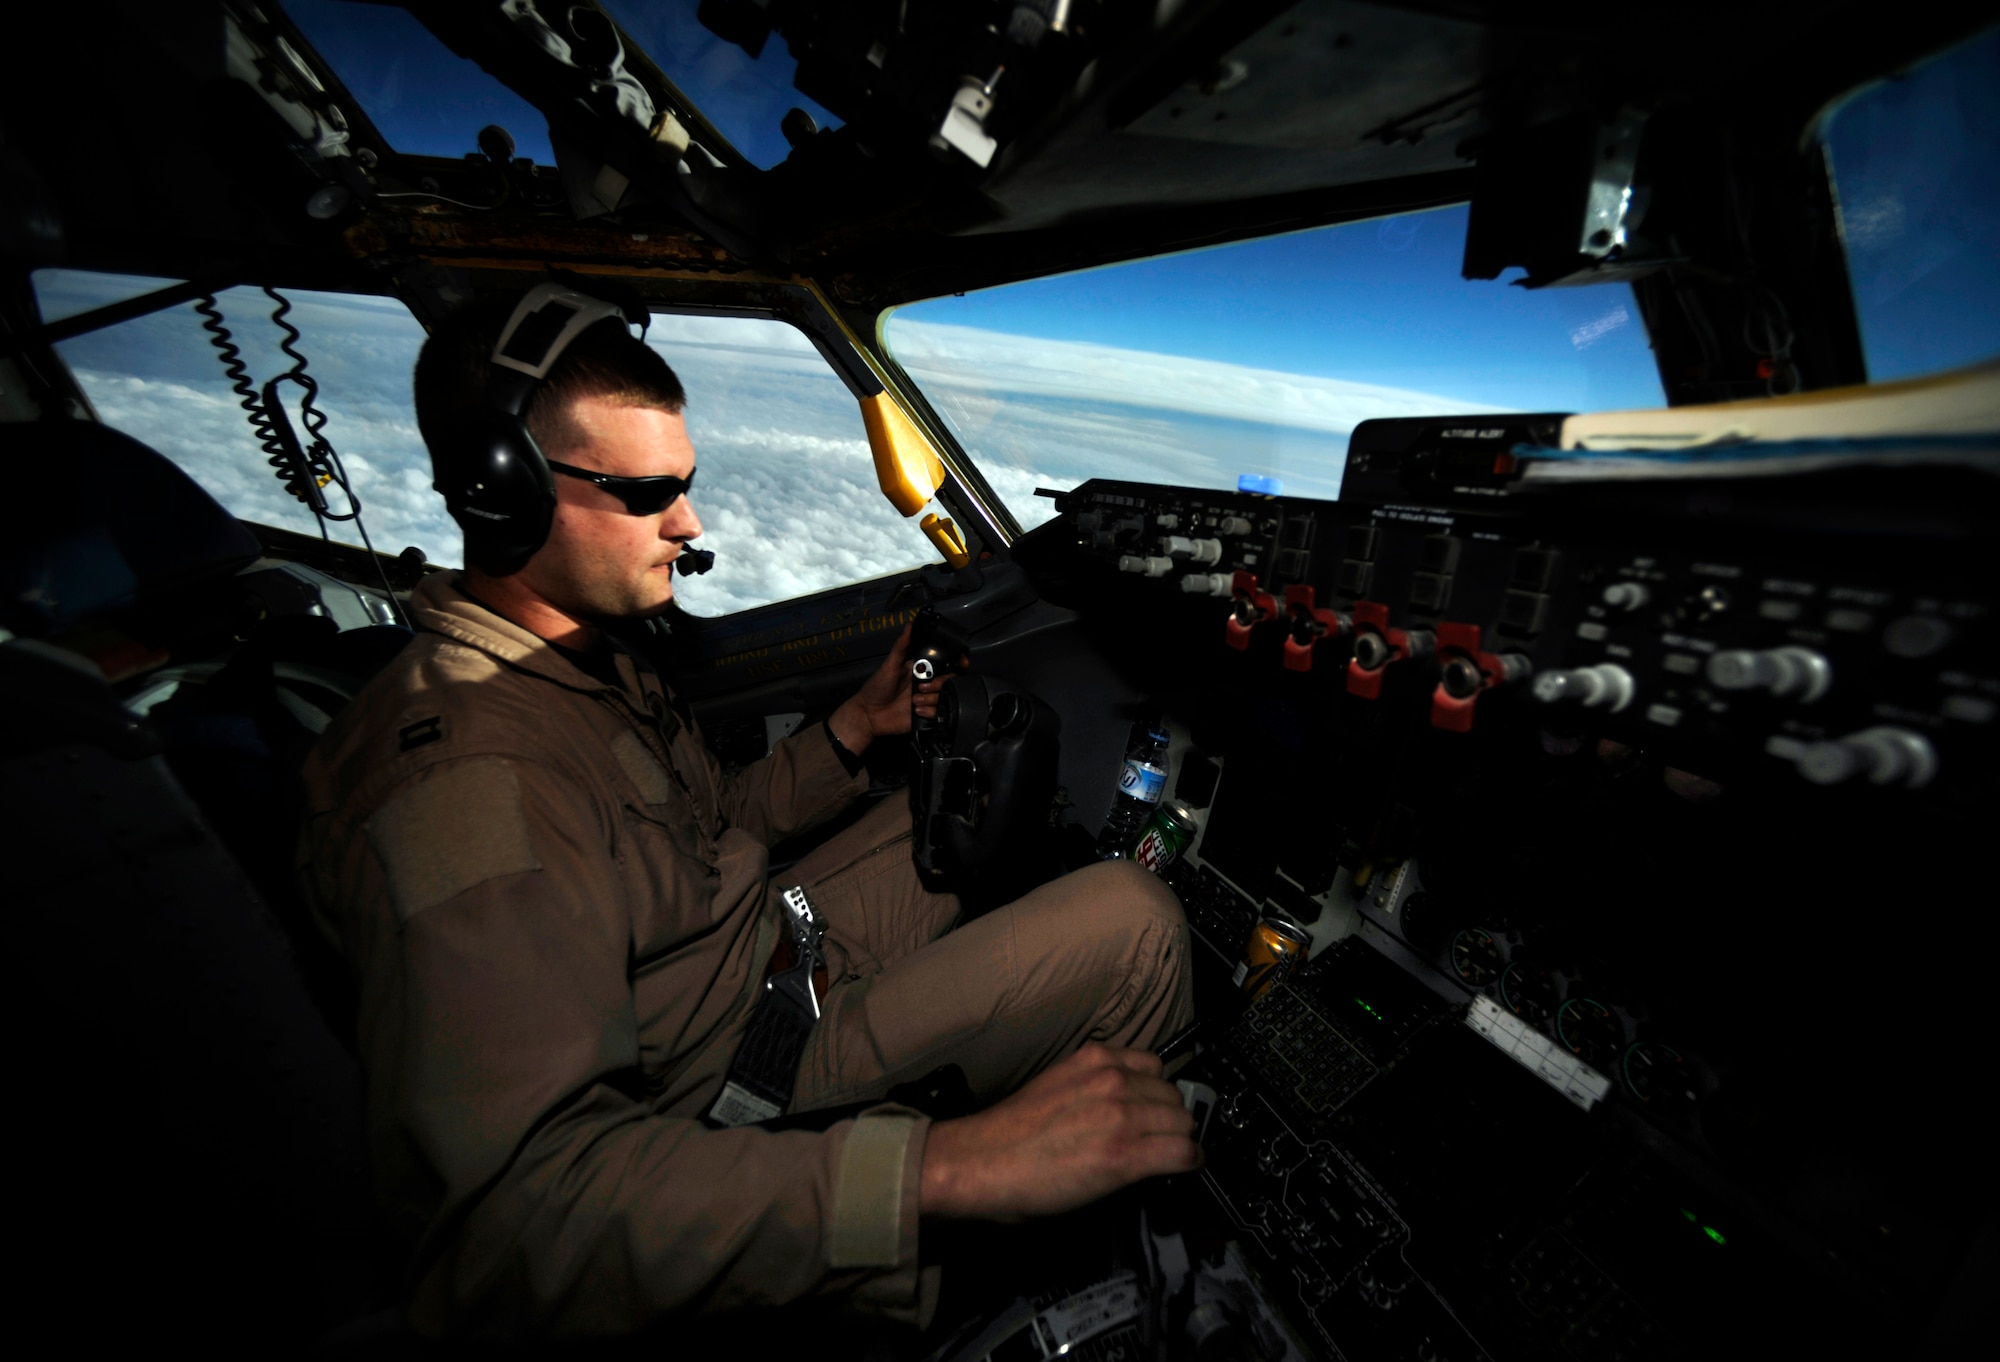 Capt. Micah Vander Veen, assigned to the 340th Expeditionary Air Refueling Squadron at an air base in Southwest Asia, pilots a KC-135 Stratotanker on an air refueling mission in support of Operation Iraqi Freedom.  (U.S. Air Force photo/Staff Sgt. James L. Harper Jr.) 